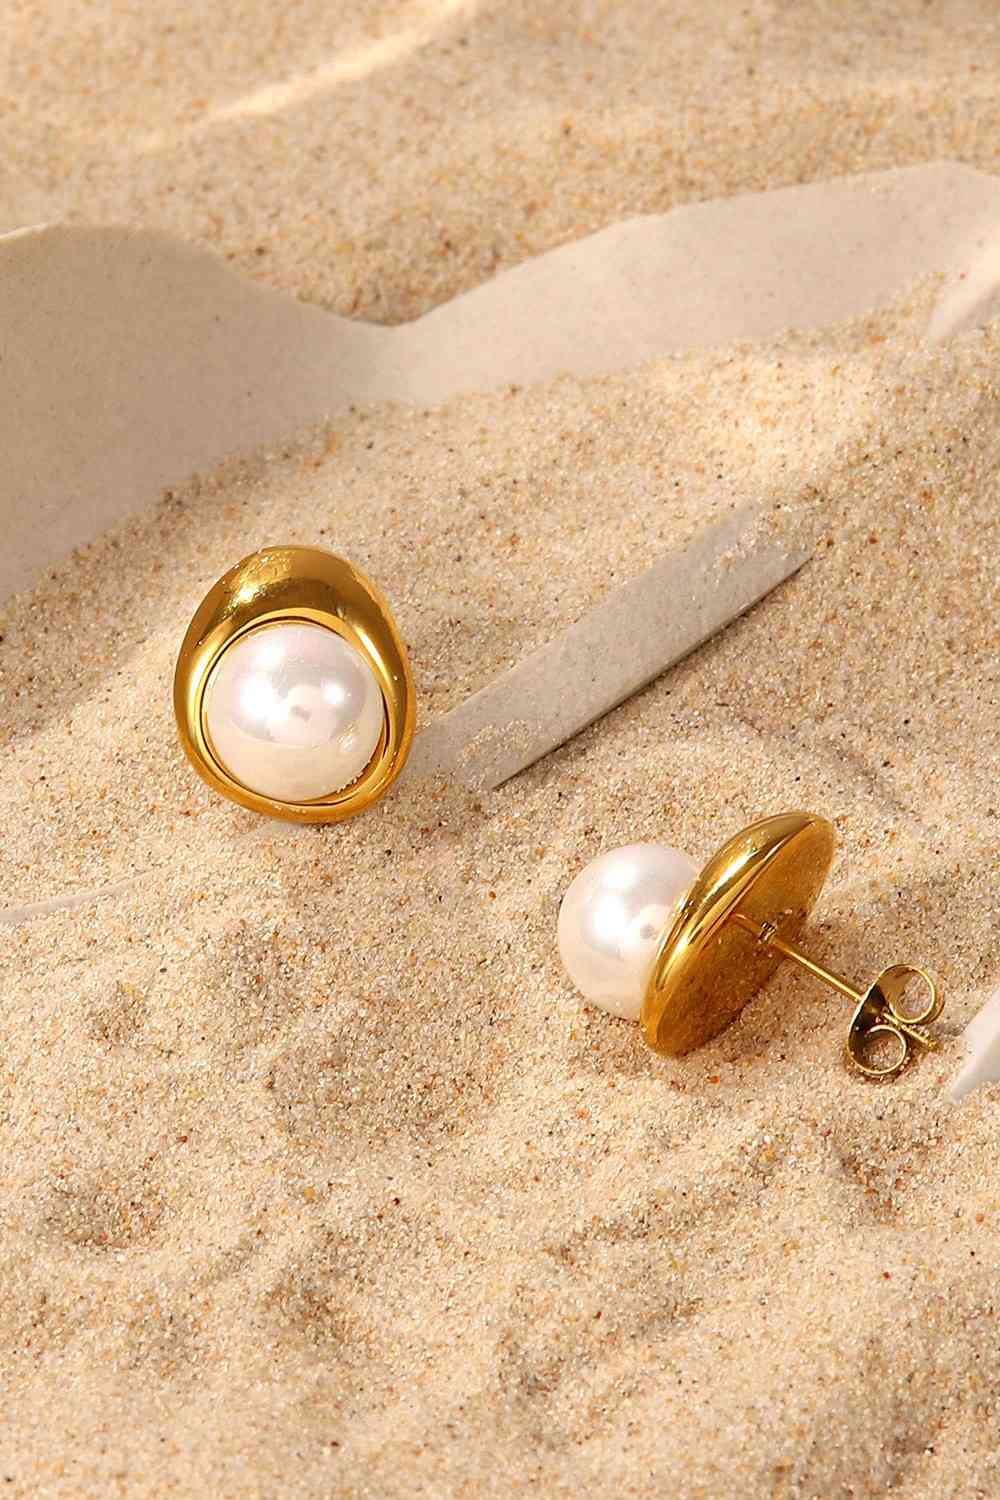 Lovelier Than Ever Pearl Stud Earrings - Kawaii Stop - Durable and Stylish, Elegant Gift Idea, Elegant Pearl Earrings, Everyday Elegance, Exquisite Design, Fashion Accessories, Fashion Forward, Glamorous Touch, Gold-Plated Accents, High-Quality Craftsmanship, Irresistible Charm, Jack&Din, Pearl Stud Earrings, Perfect for All Occasions, Ship From Overseas, Sophisticated Style, Stainless Steel Jewelry, Timeless Beauty, Women's Jewelry